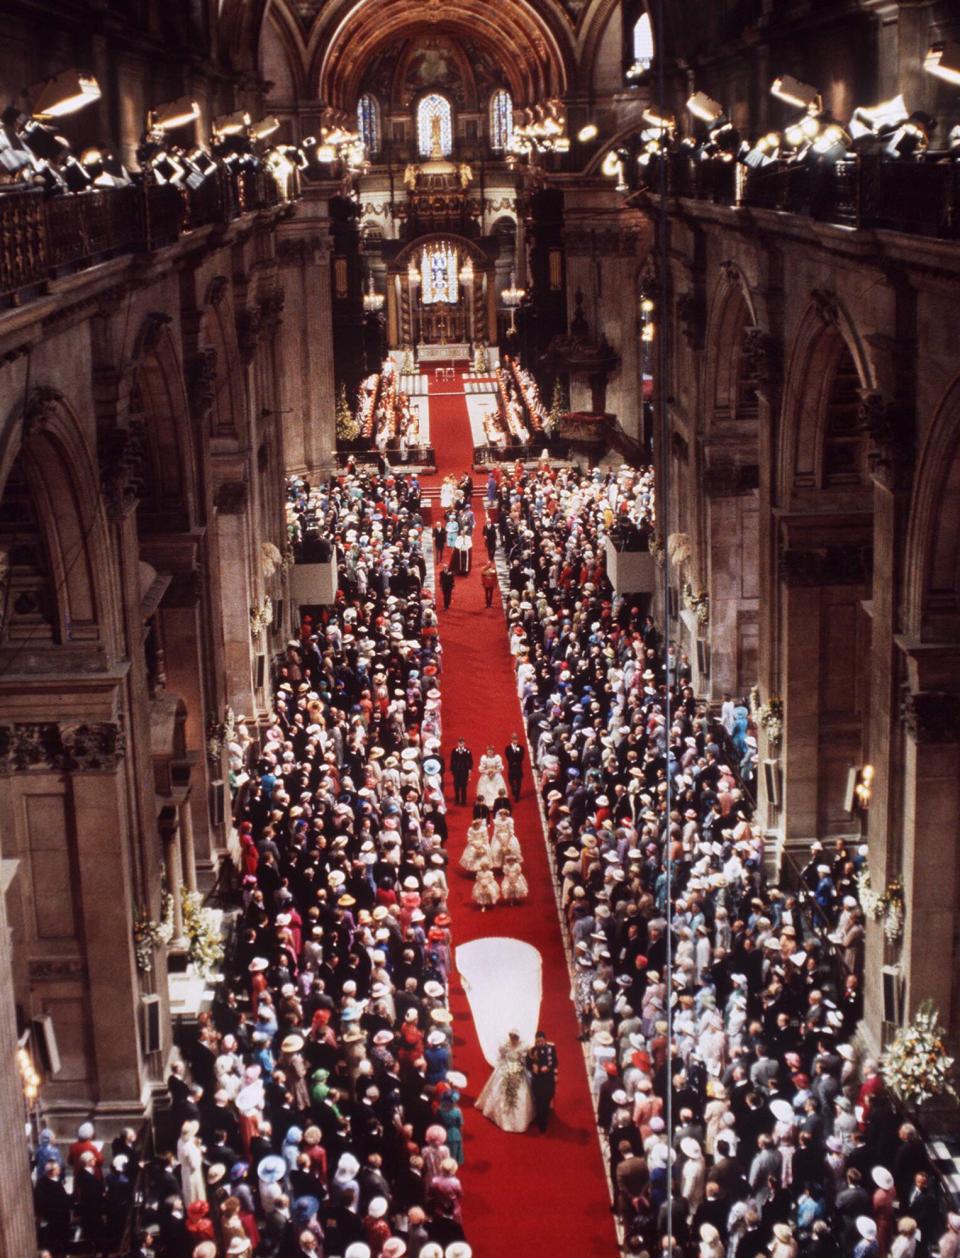 The Wedding Of Prince Charles To Lady Diana Spencer Held At St Paul's Cathedral In London.